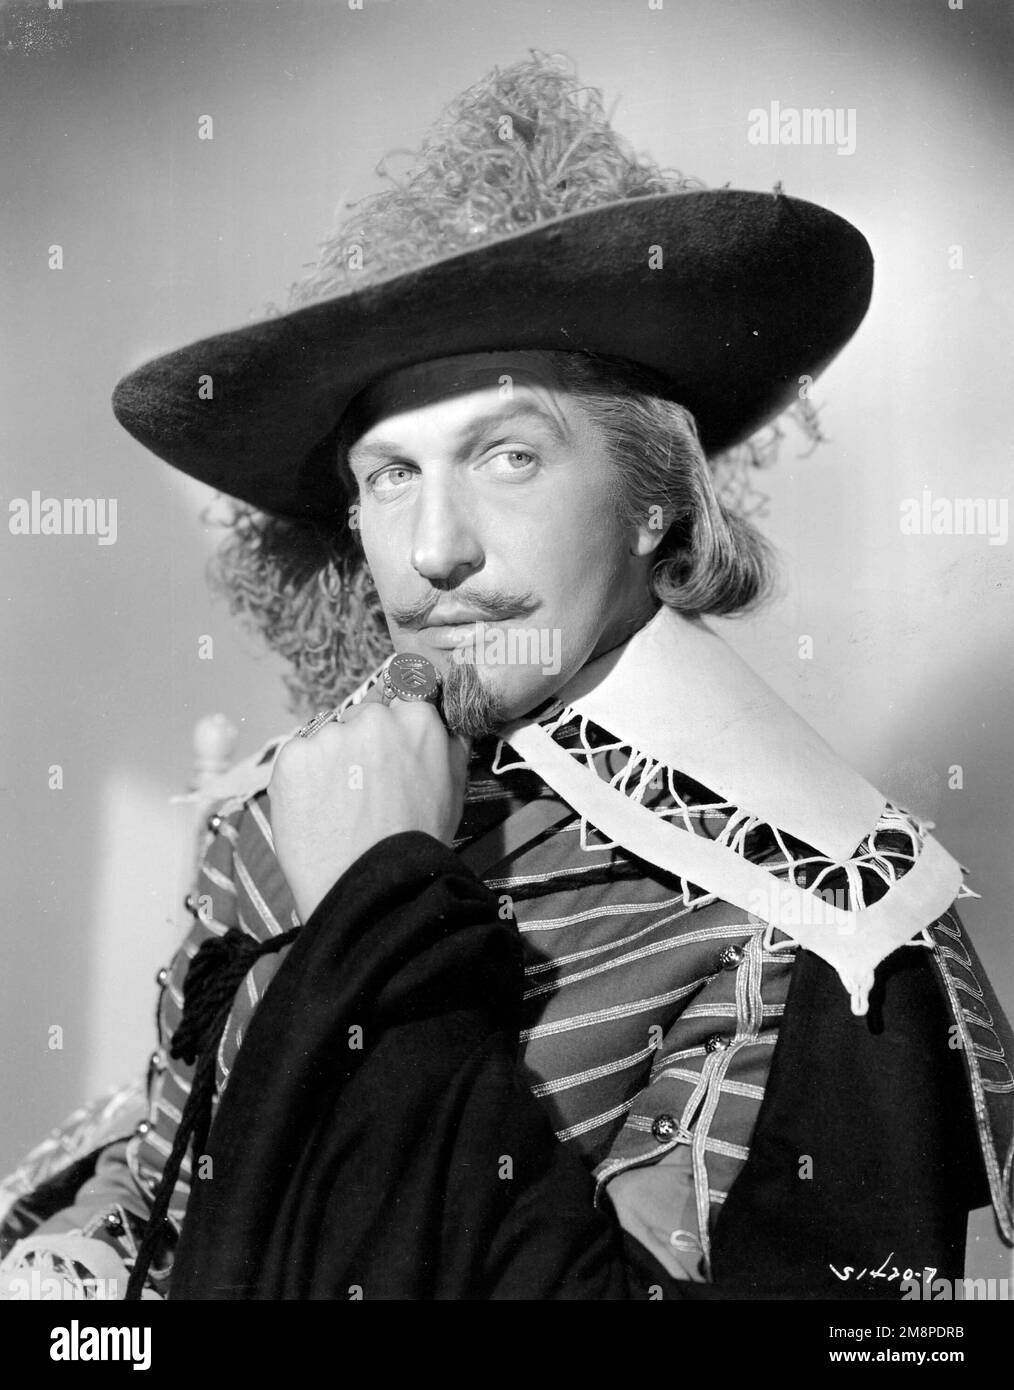 VINCENT PRICE in THE THREE MUSKETEERS (1948), directed by GEORGE SIDNEY. Credit: M.G.M. / Album Stock Photo